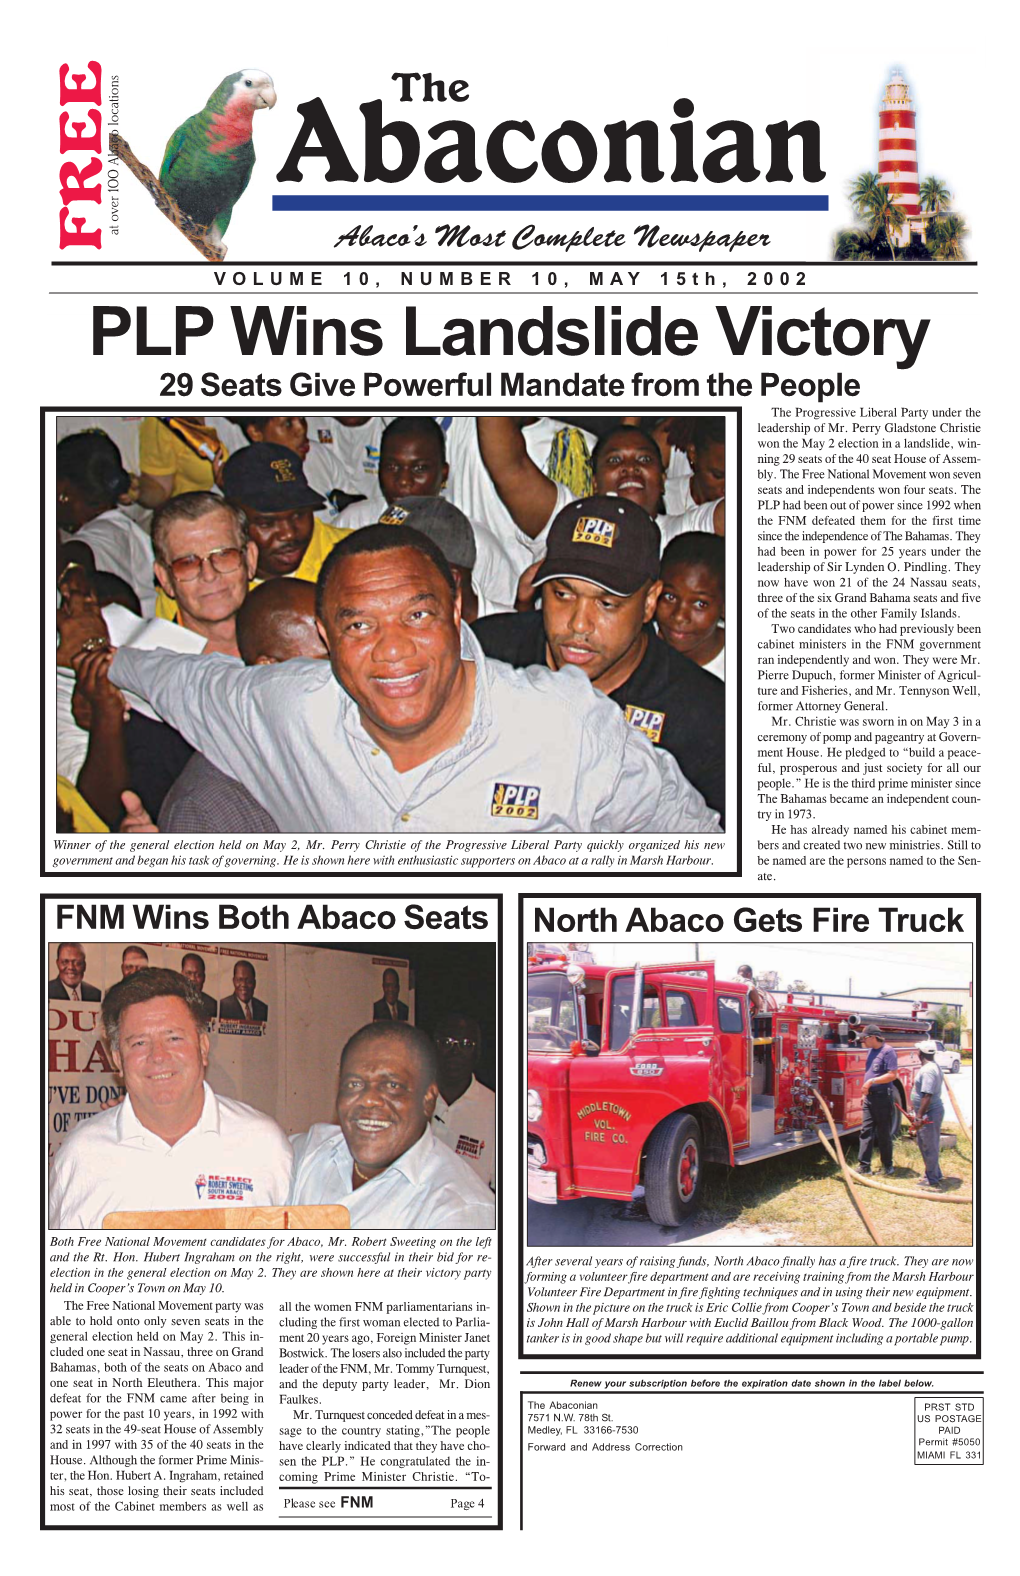 PLP Wins Landslide Victory 29 Seats Give Powerful Mandate from the People the Progressive Liberal Party Under the Leadership of Mr